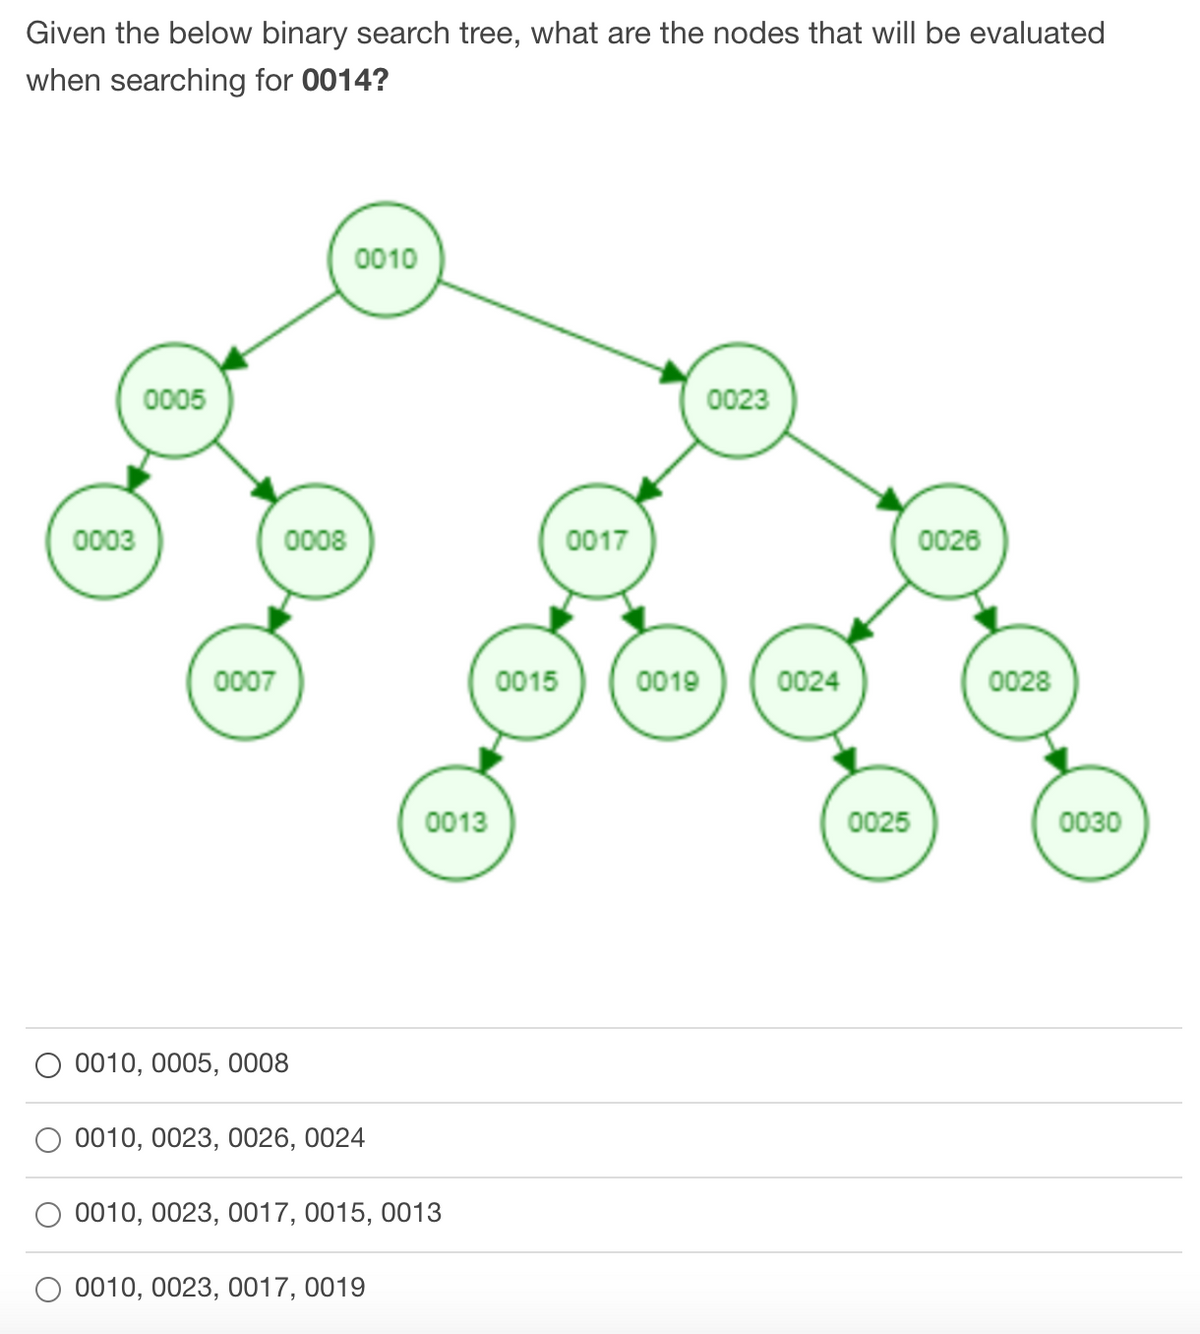 Given the below binary search tree, what are the nodes that will be evaluated
when searching for 0014?
0010
0005
0023
0003
0008
0017
0026
0007
0015
0019
0024
0028
0013
0025
0030
0010, 0005, 0008
0010, 0023, 0026, 0024
0010, 0023, 0017, 0015, 0013
0010, 0023, 0017, 0019
